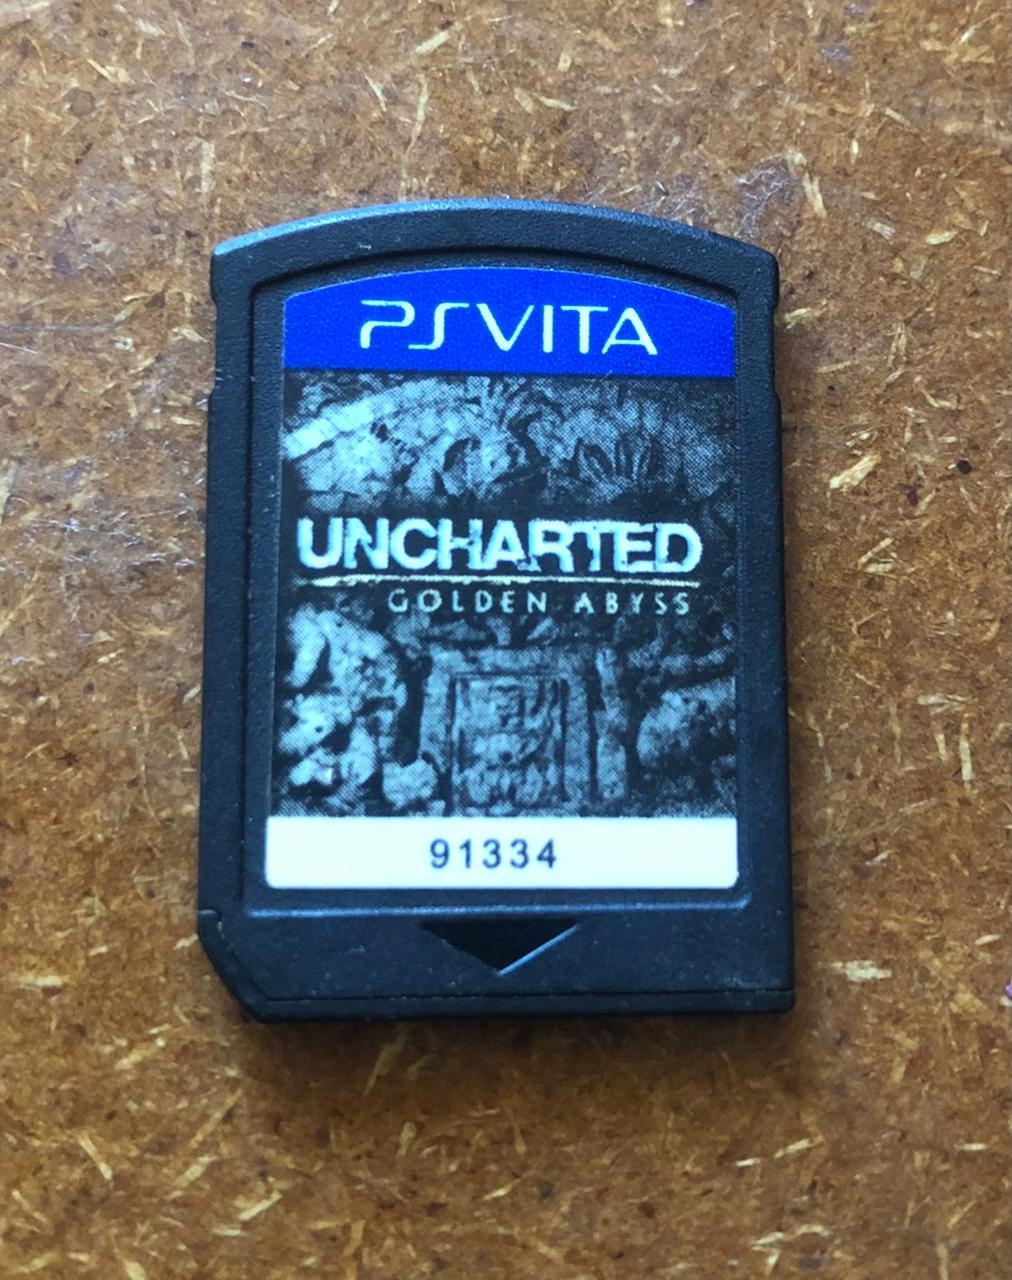 uncharted-golden-abyss-item-only-playstation-vita